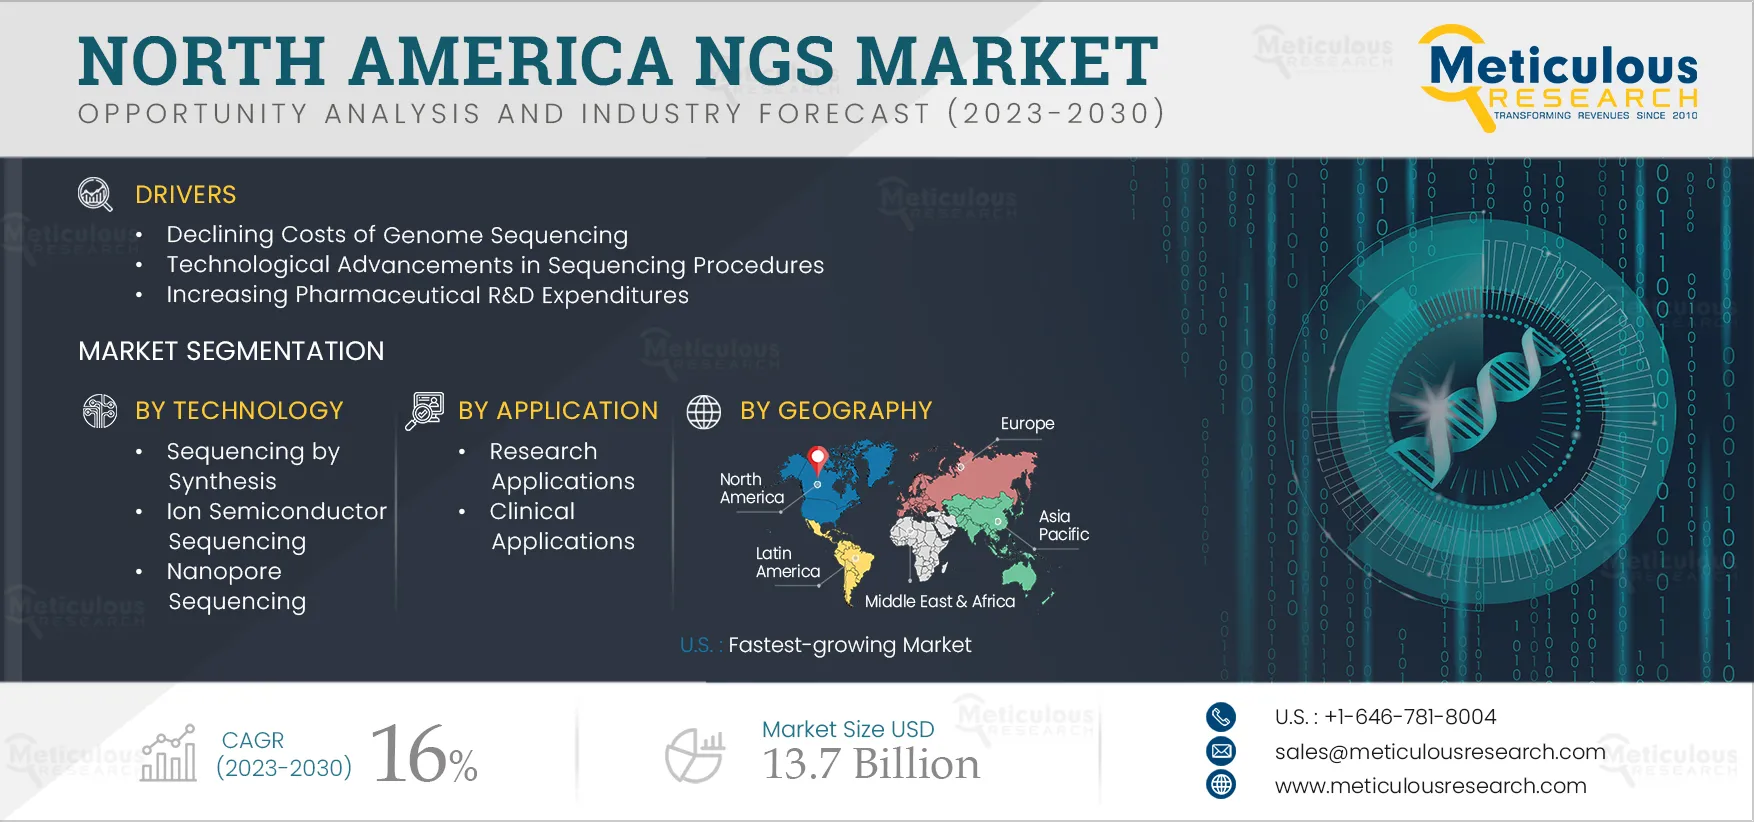 North America NGS Market